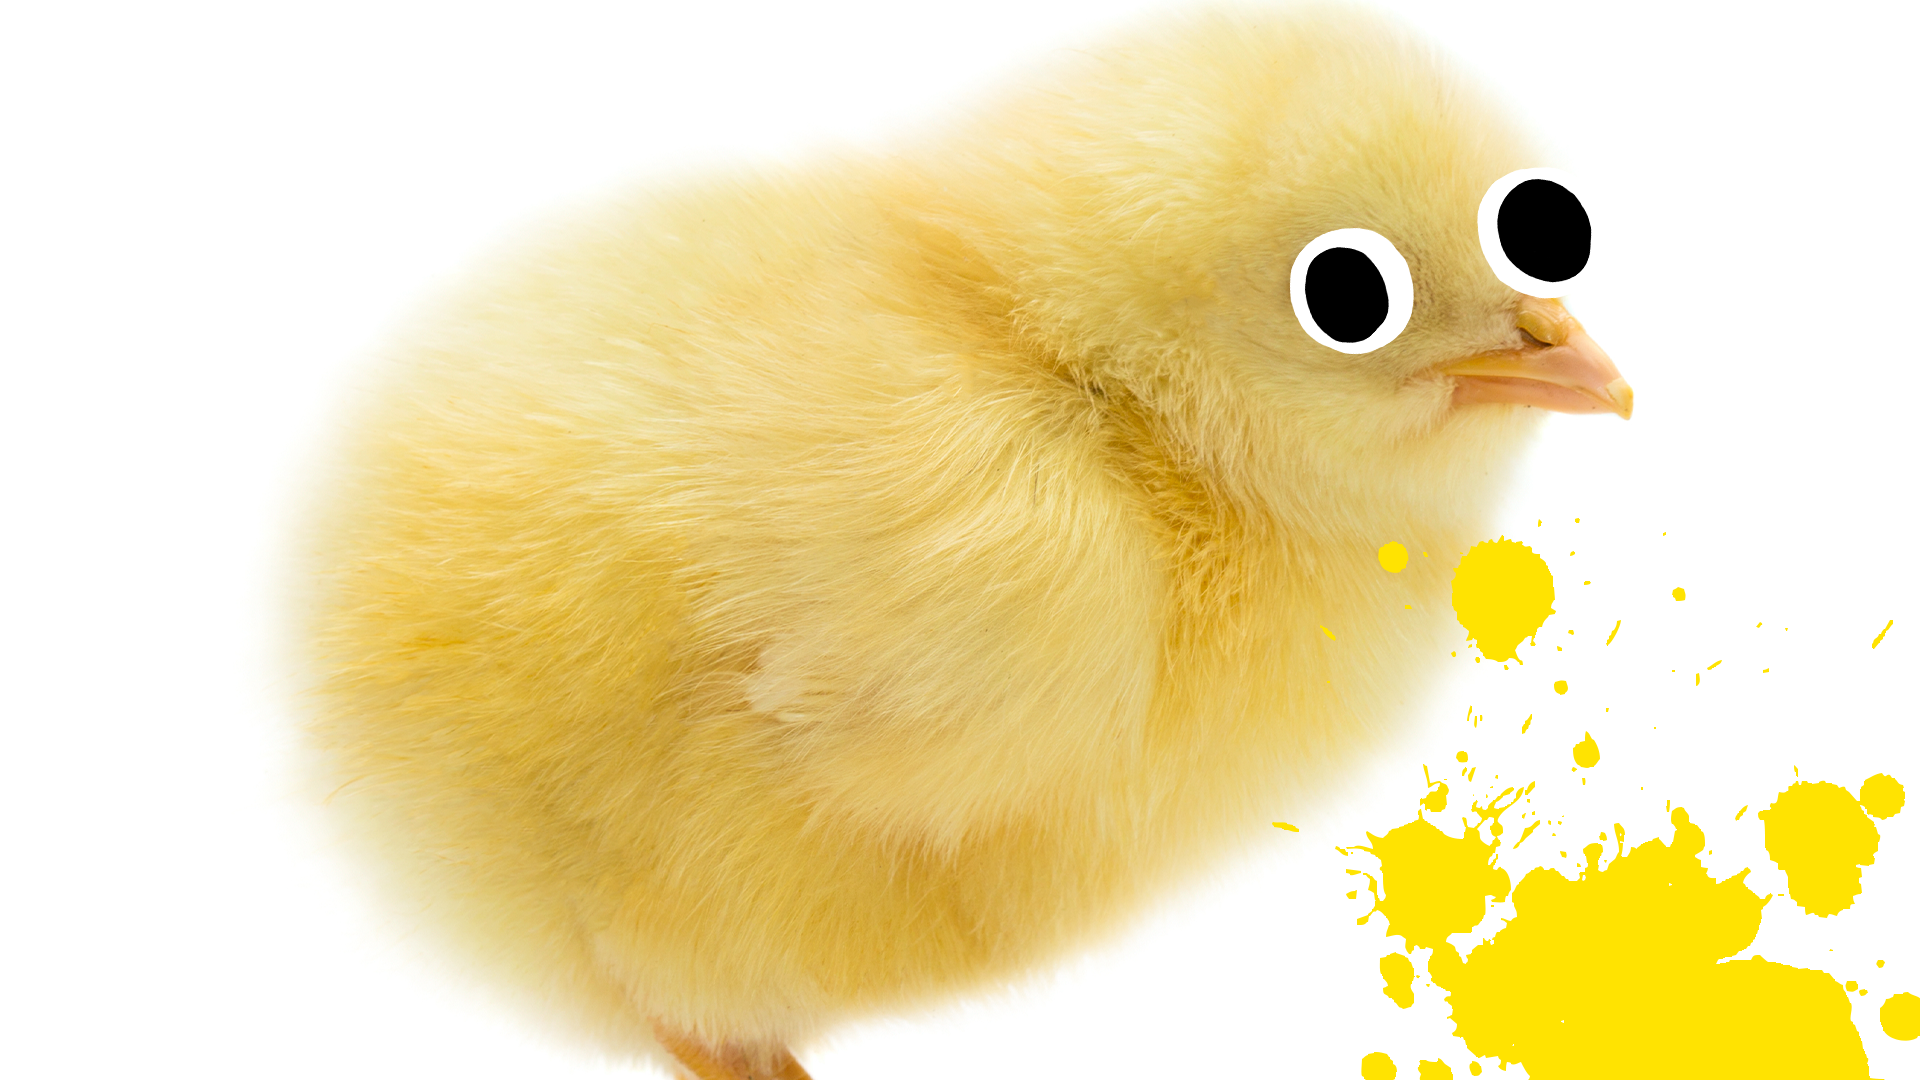 Fluffy chick on white background with yellow splat